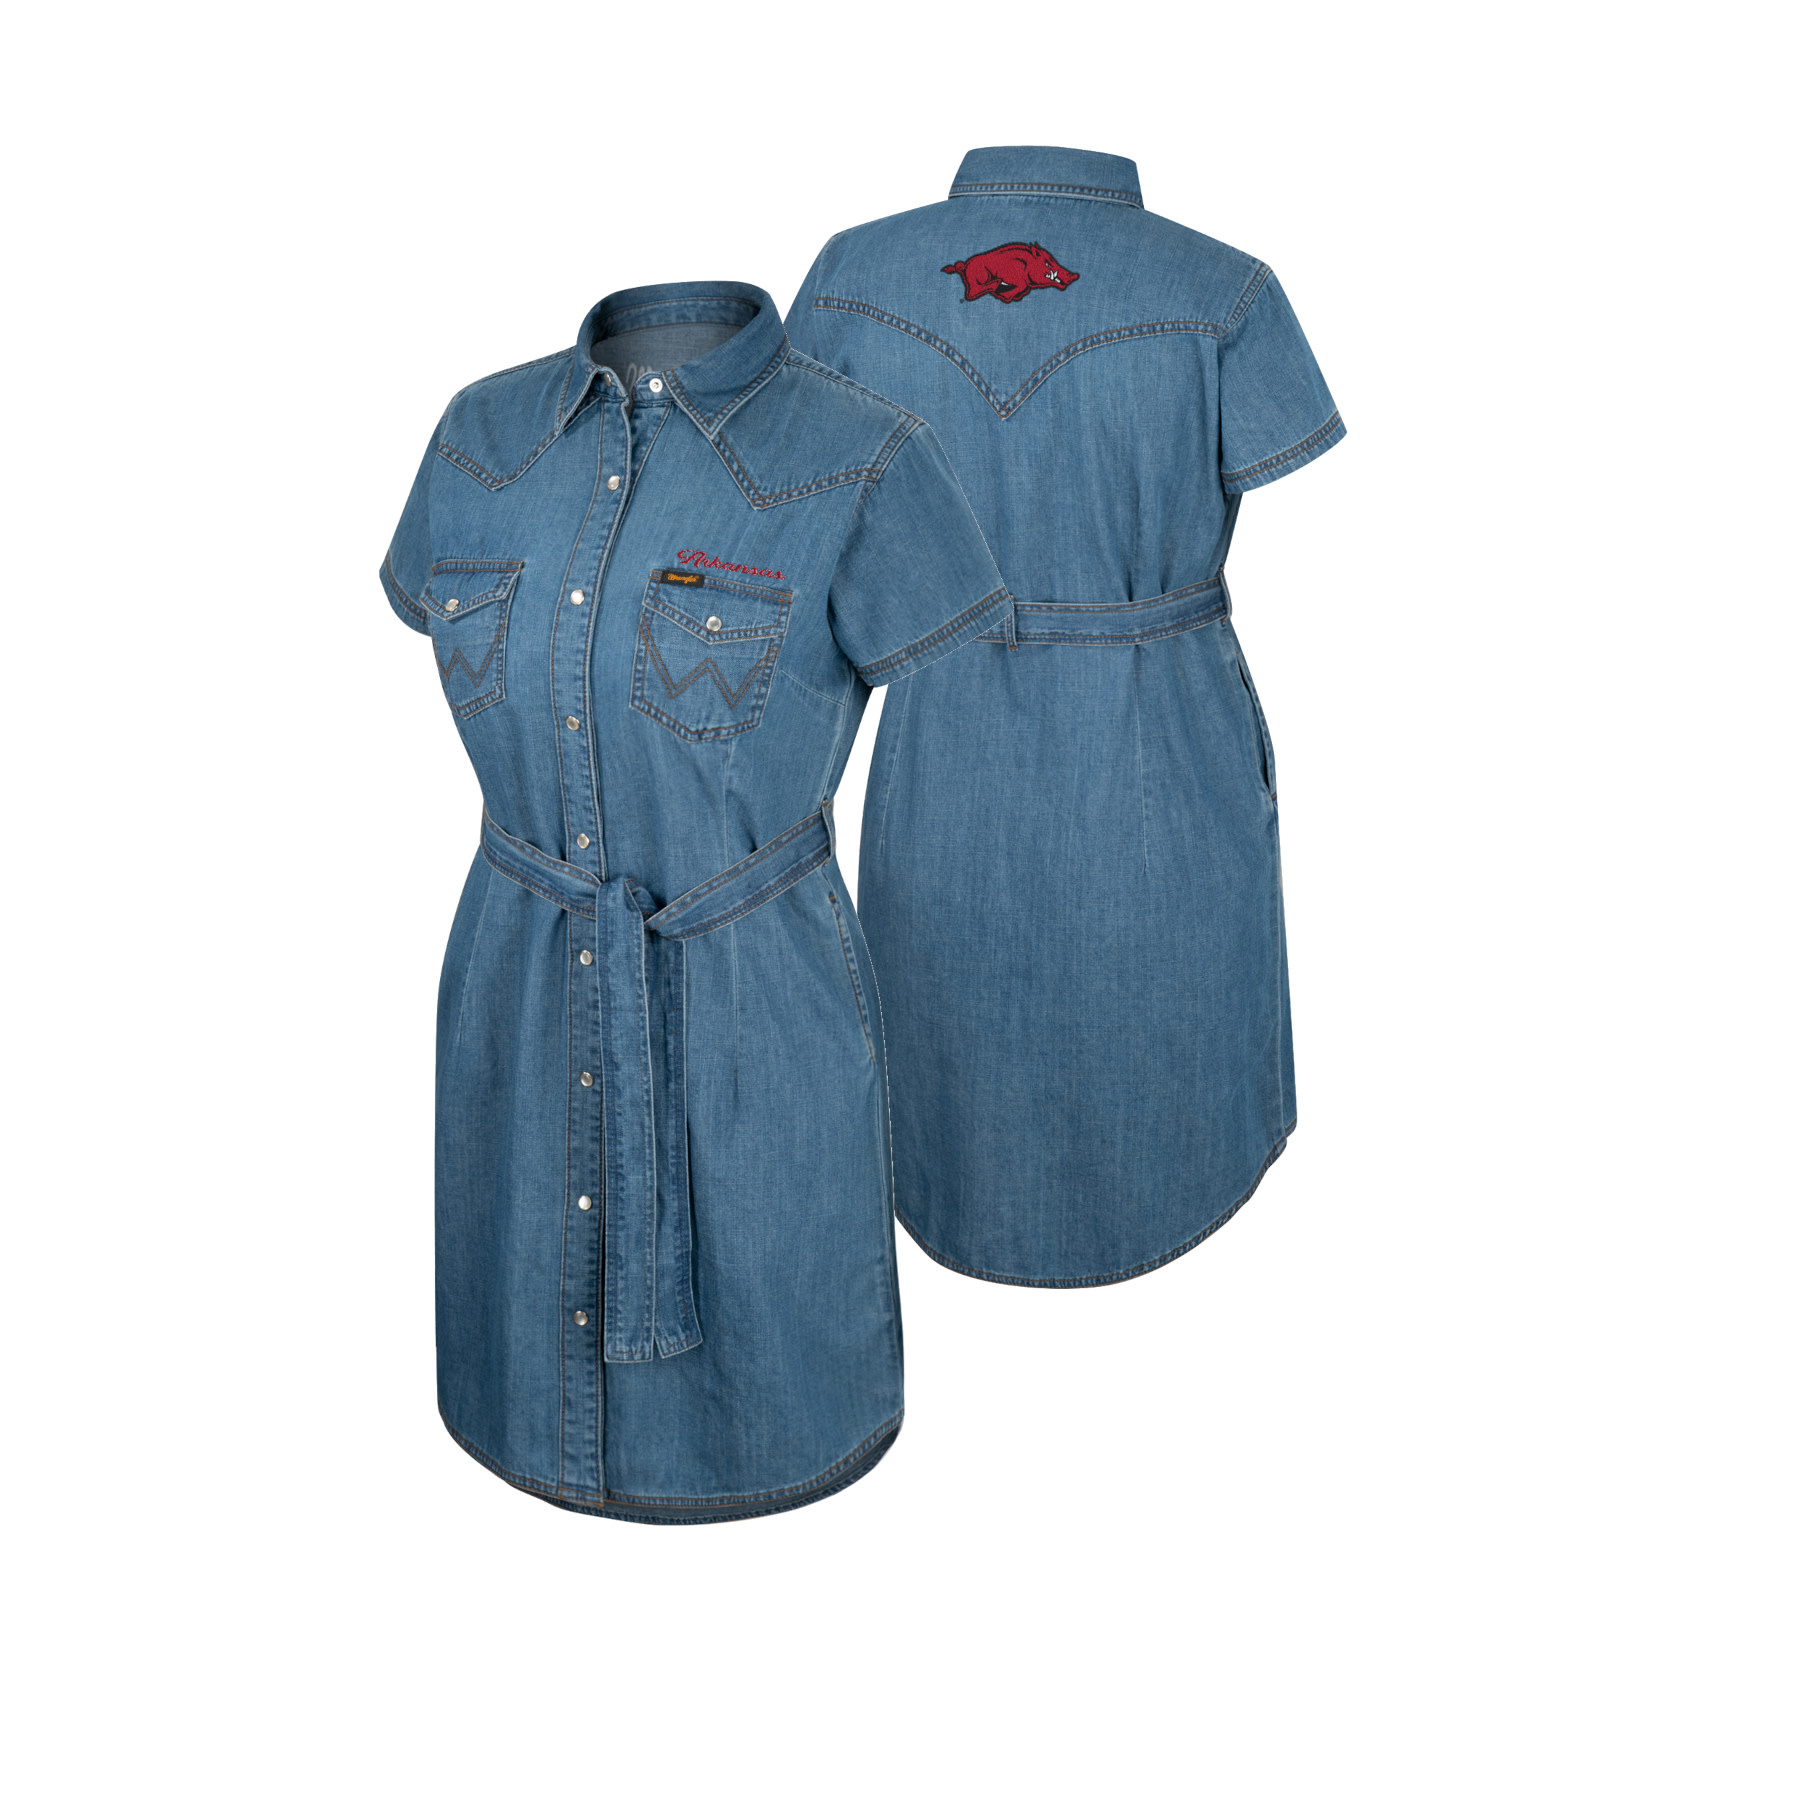 Dropship Denim Dress For Women Summer Dress Short Sleeve Button Down Tiered  Babydoll Denim Jean Dress to Sell Online at a Lower Price | Doba